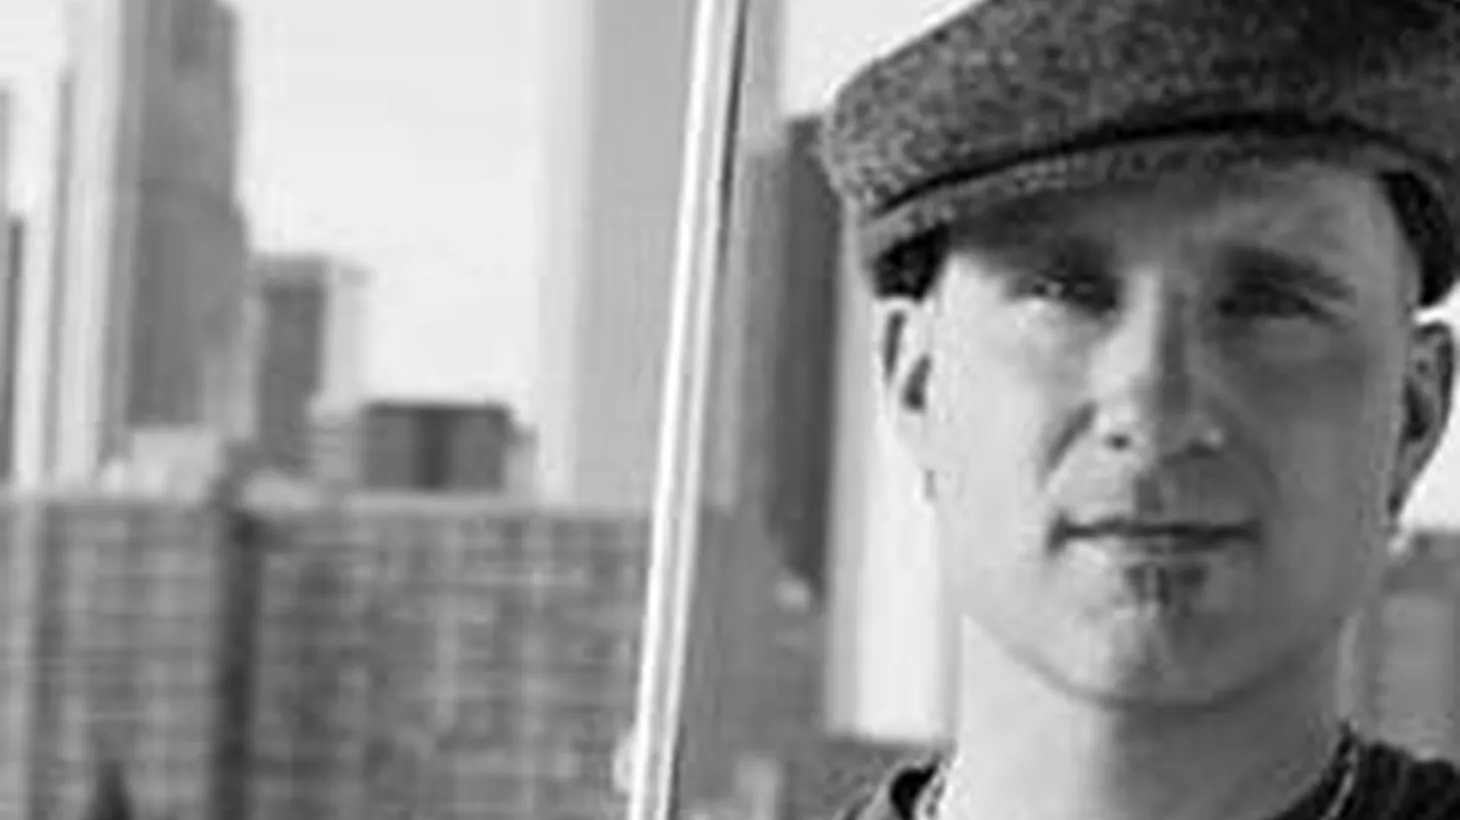 Singer and songwriter Gary Jules returns with his band to Morning Becomes Eclectic at 11:15am.